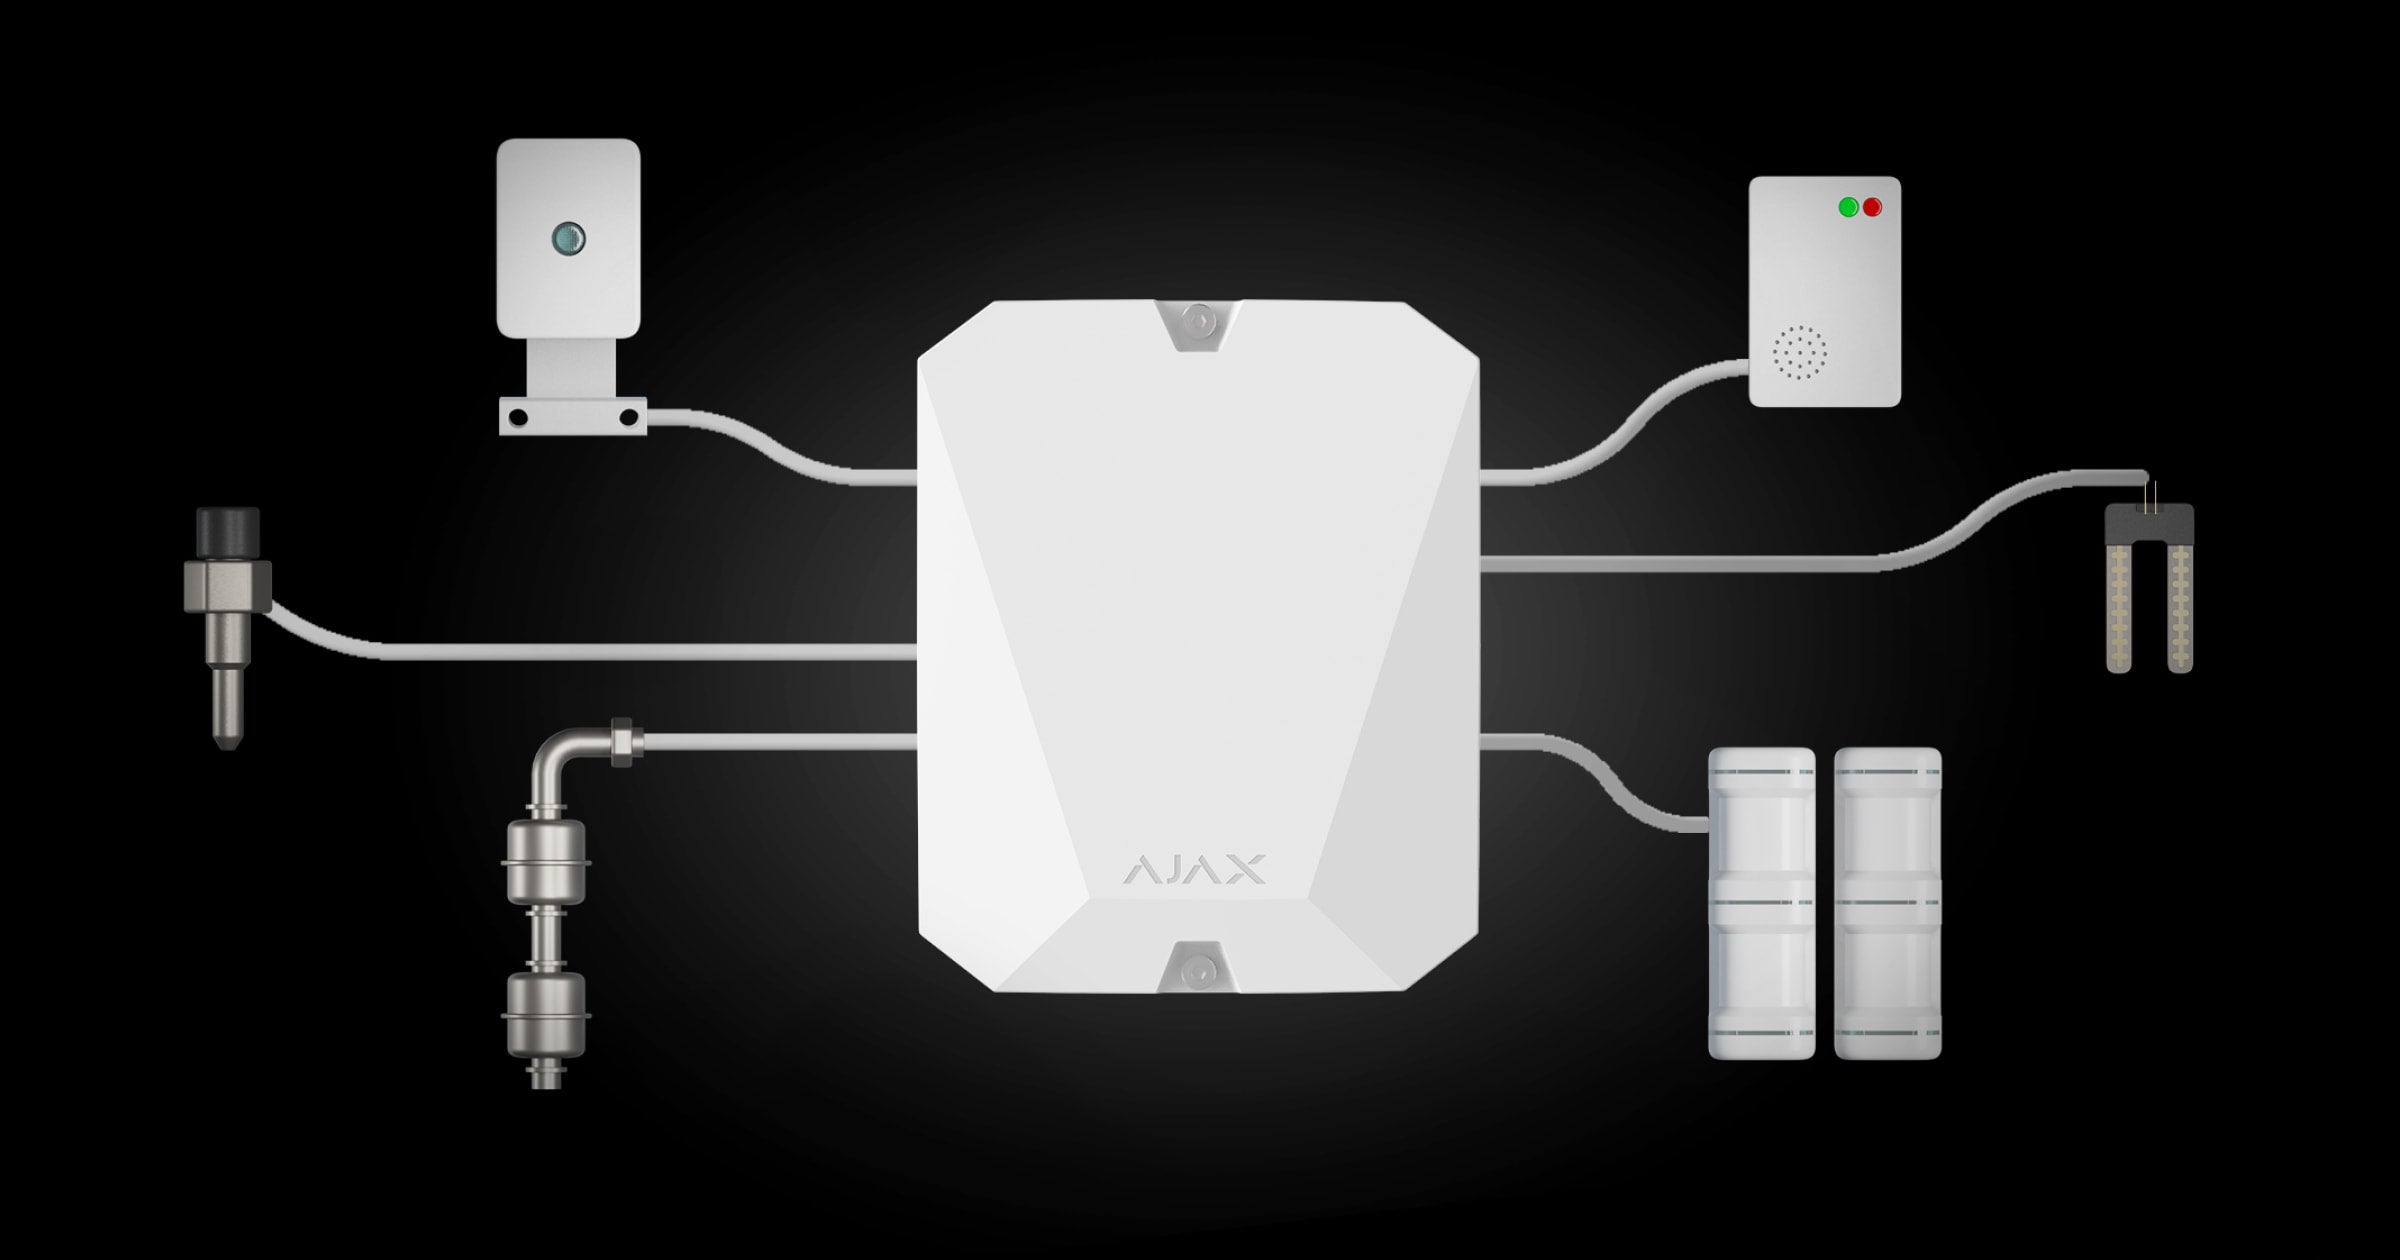 Ajax Multi Transmitter Module for connecting wired alarm to Ajax and managing security via the app Black